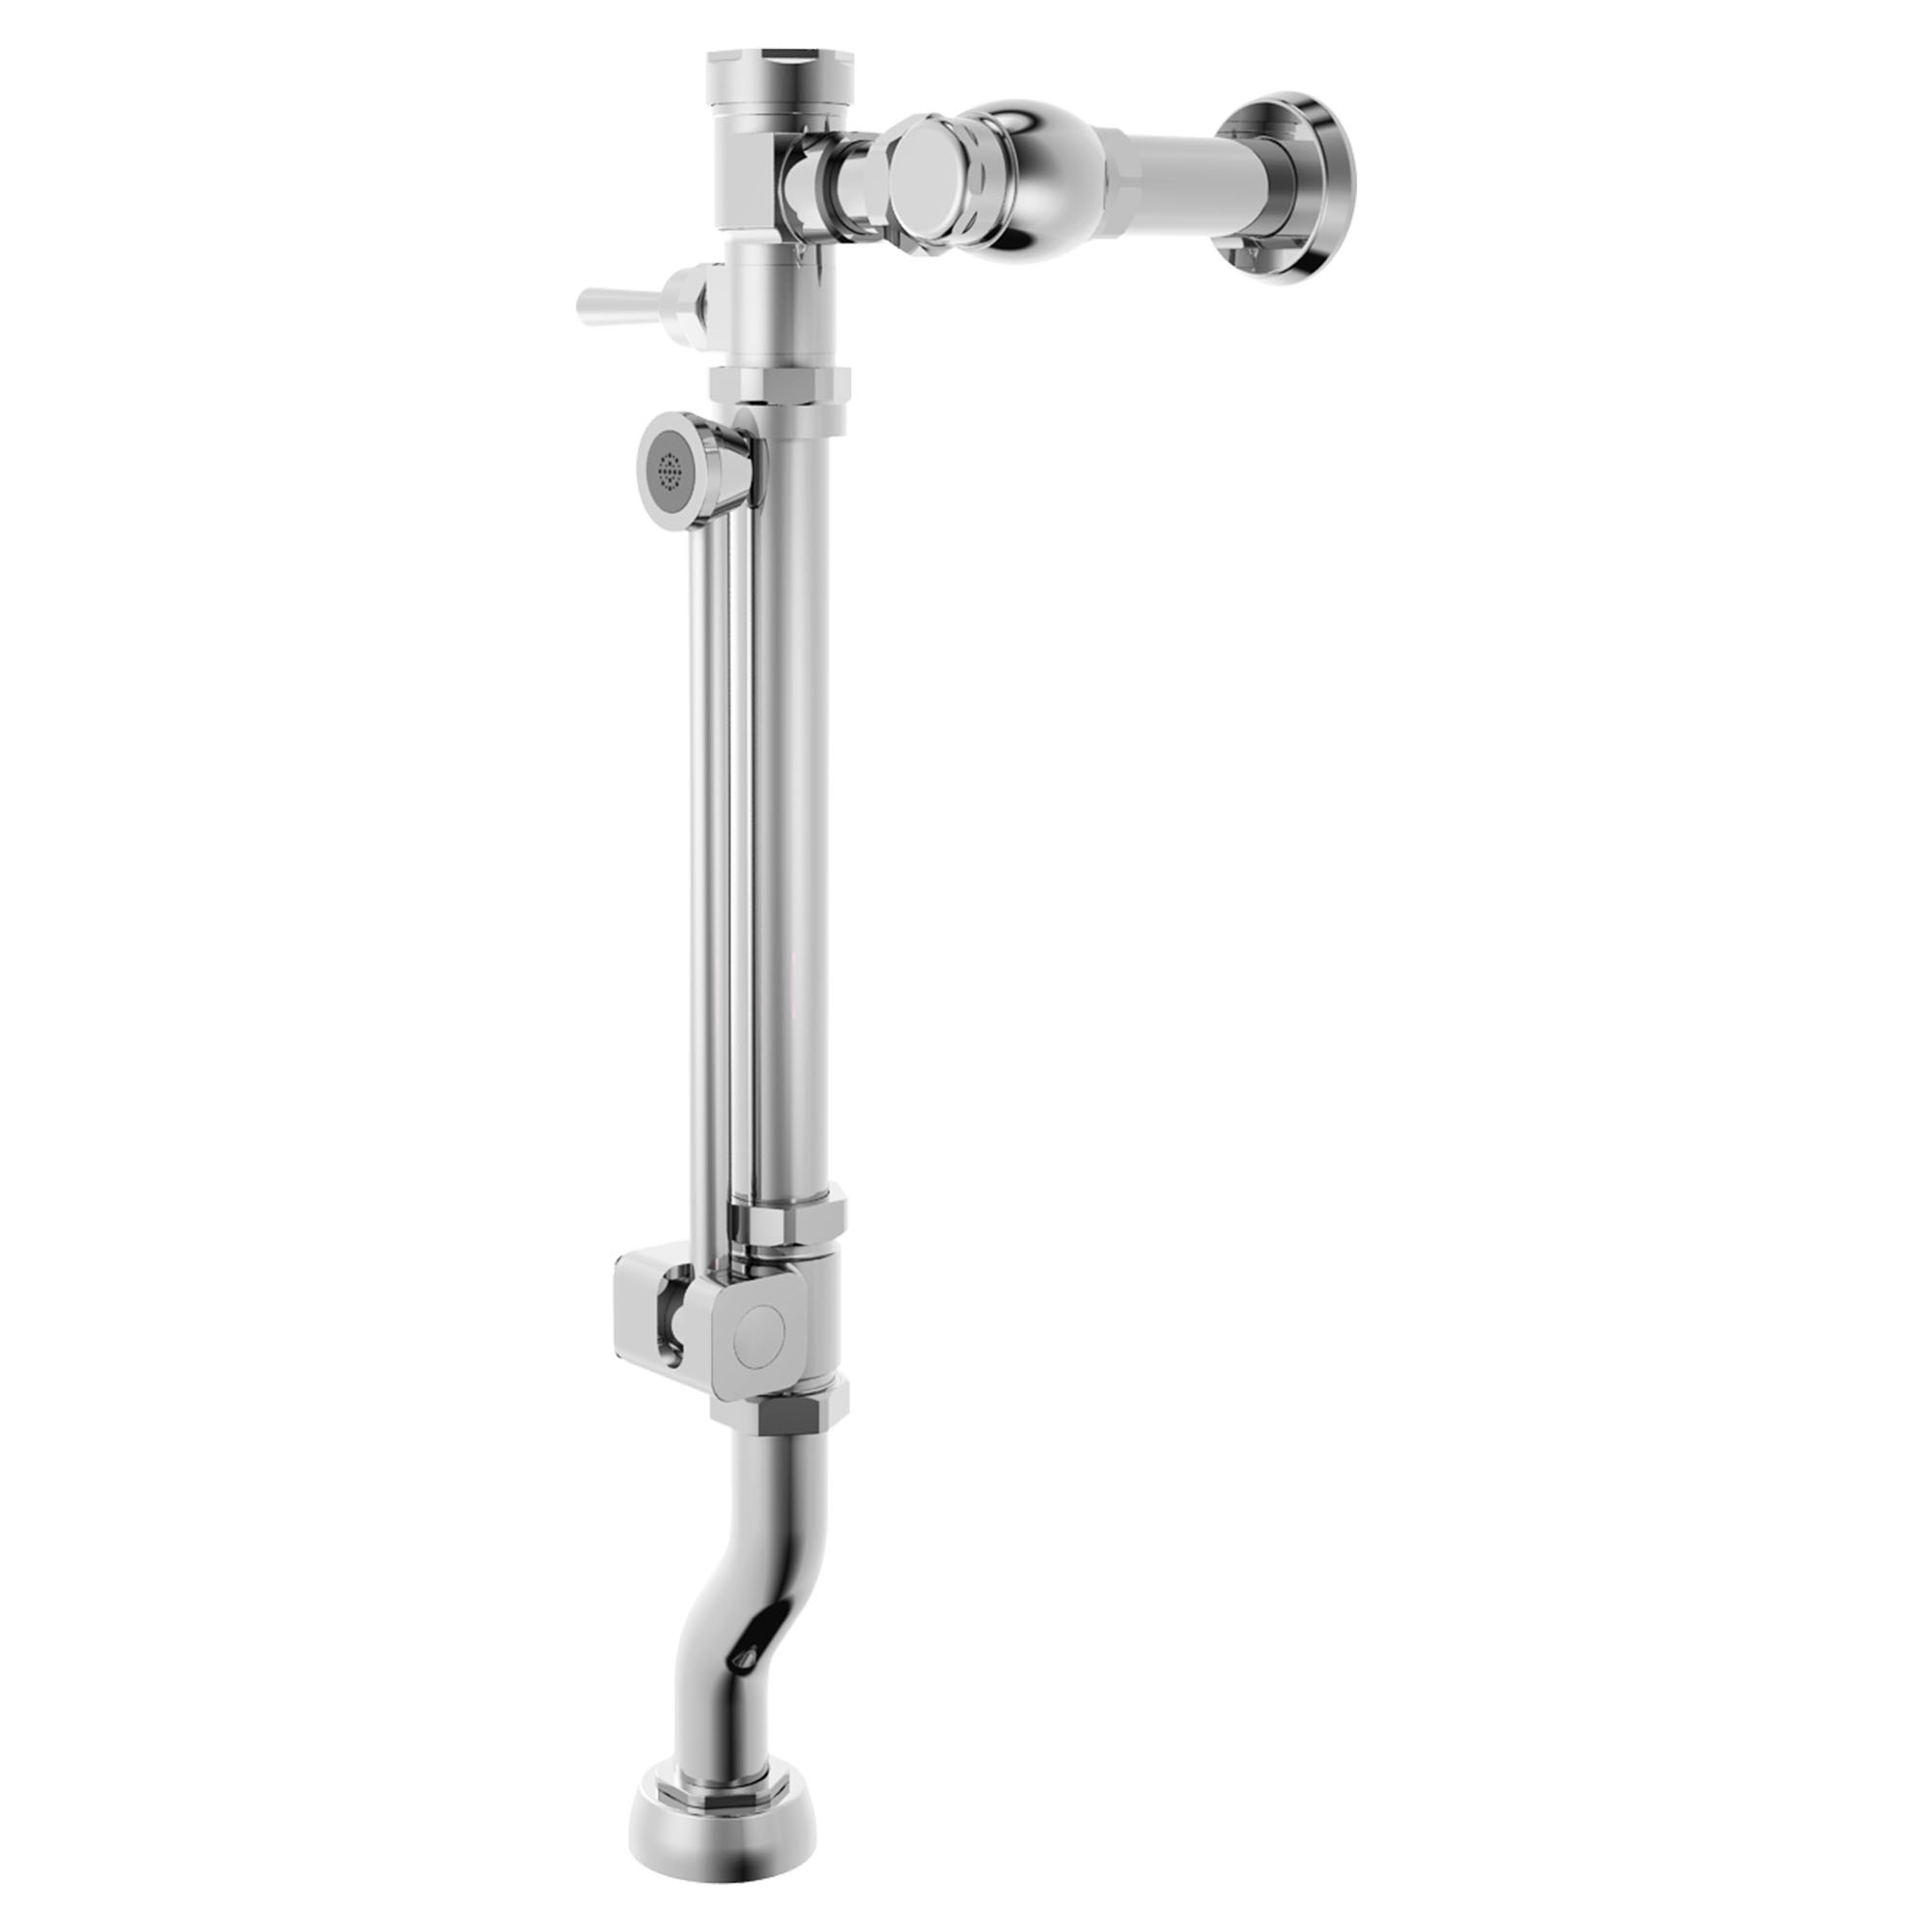 Ultima Manual Flush Valve With Bedpan Washer Assembly, Offset Tube, 1.28 gpf/4.8 Lpf